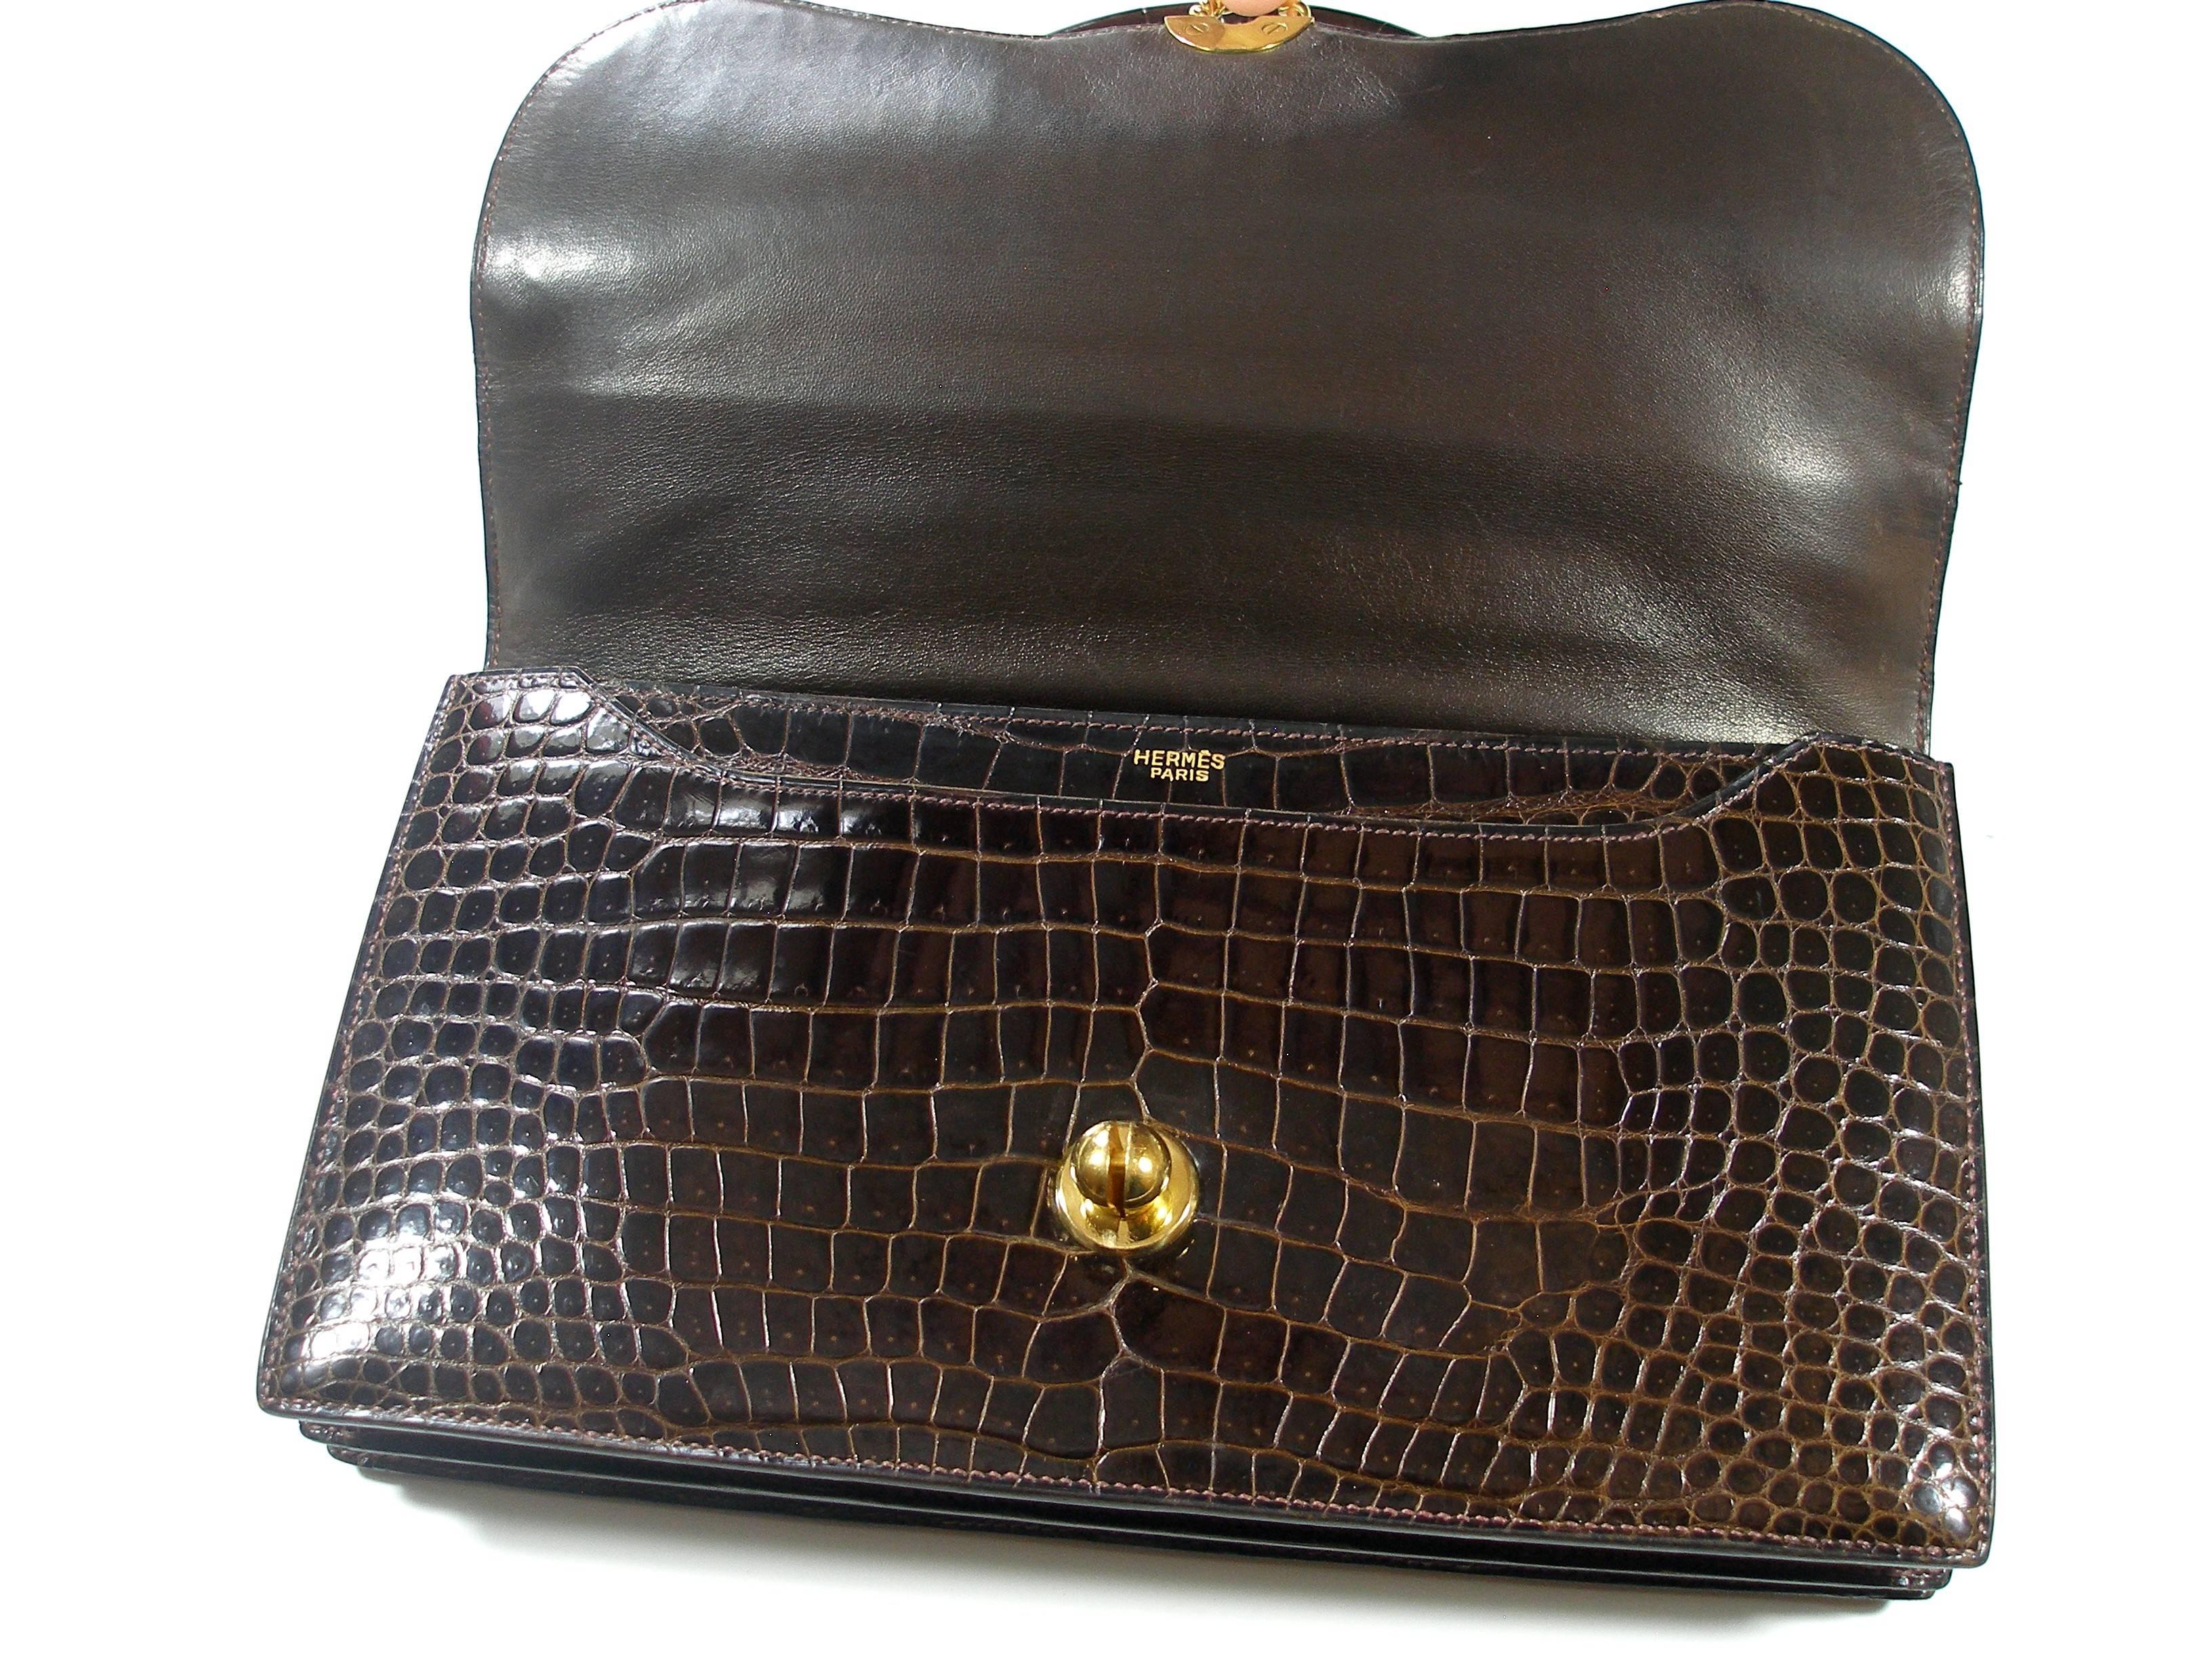 Wonderfull Hermès Vintage Bag
Crocodile Leather
Color : Brown
Gold plated Hadware
Year : 1960 
No code date inside
100 % AUTHENTIC 
No box , no dustbag 
Attention : please note 
Sewing of a bellows torn on 1 cm
The bag is in very good condition